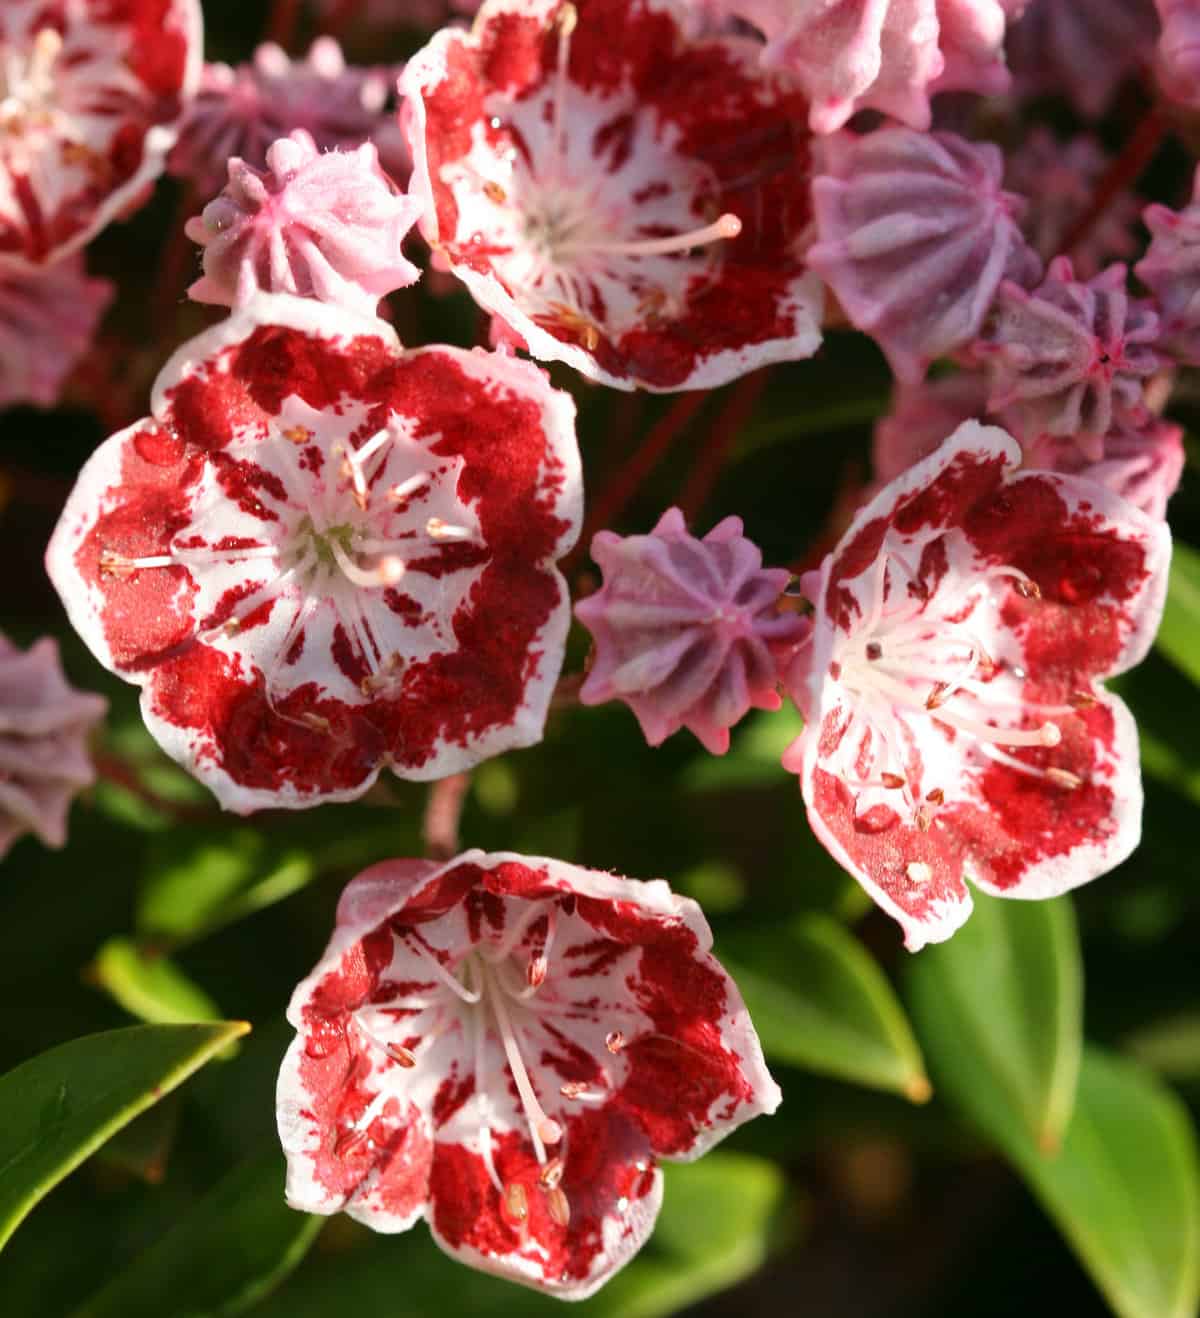 A close up of some red and white flowers. kalmia latifolia minuet